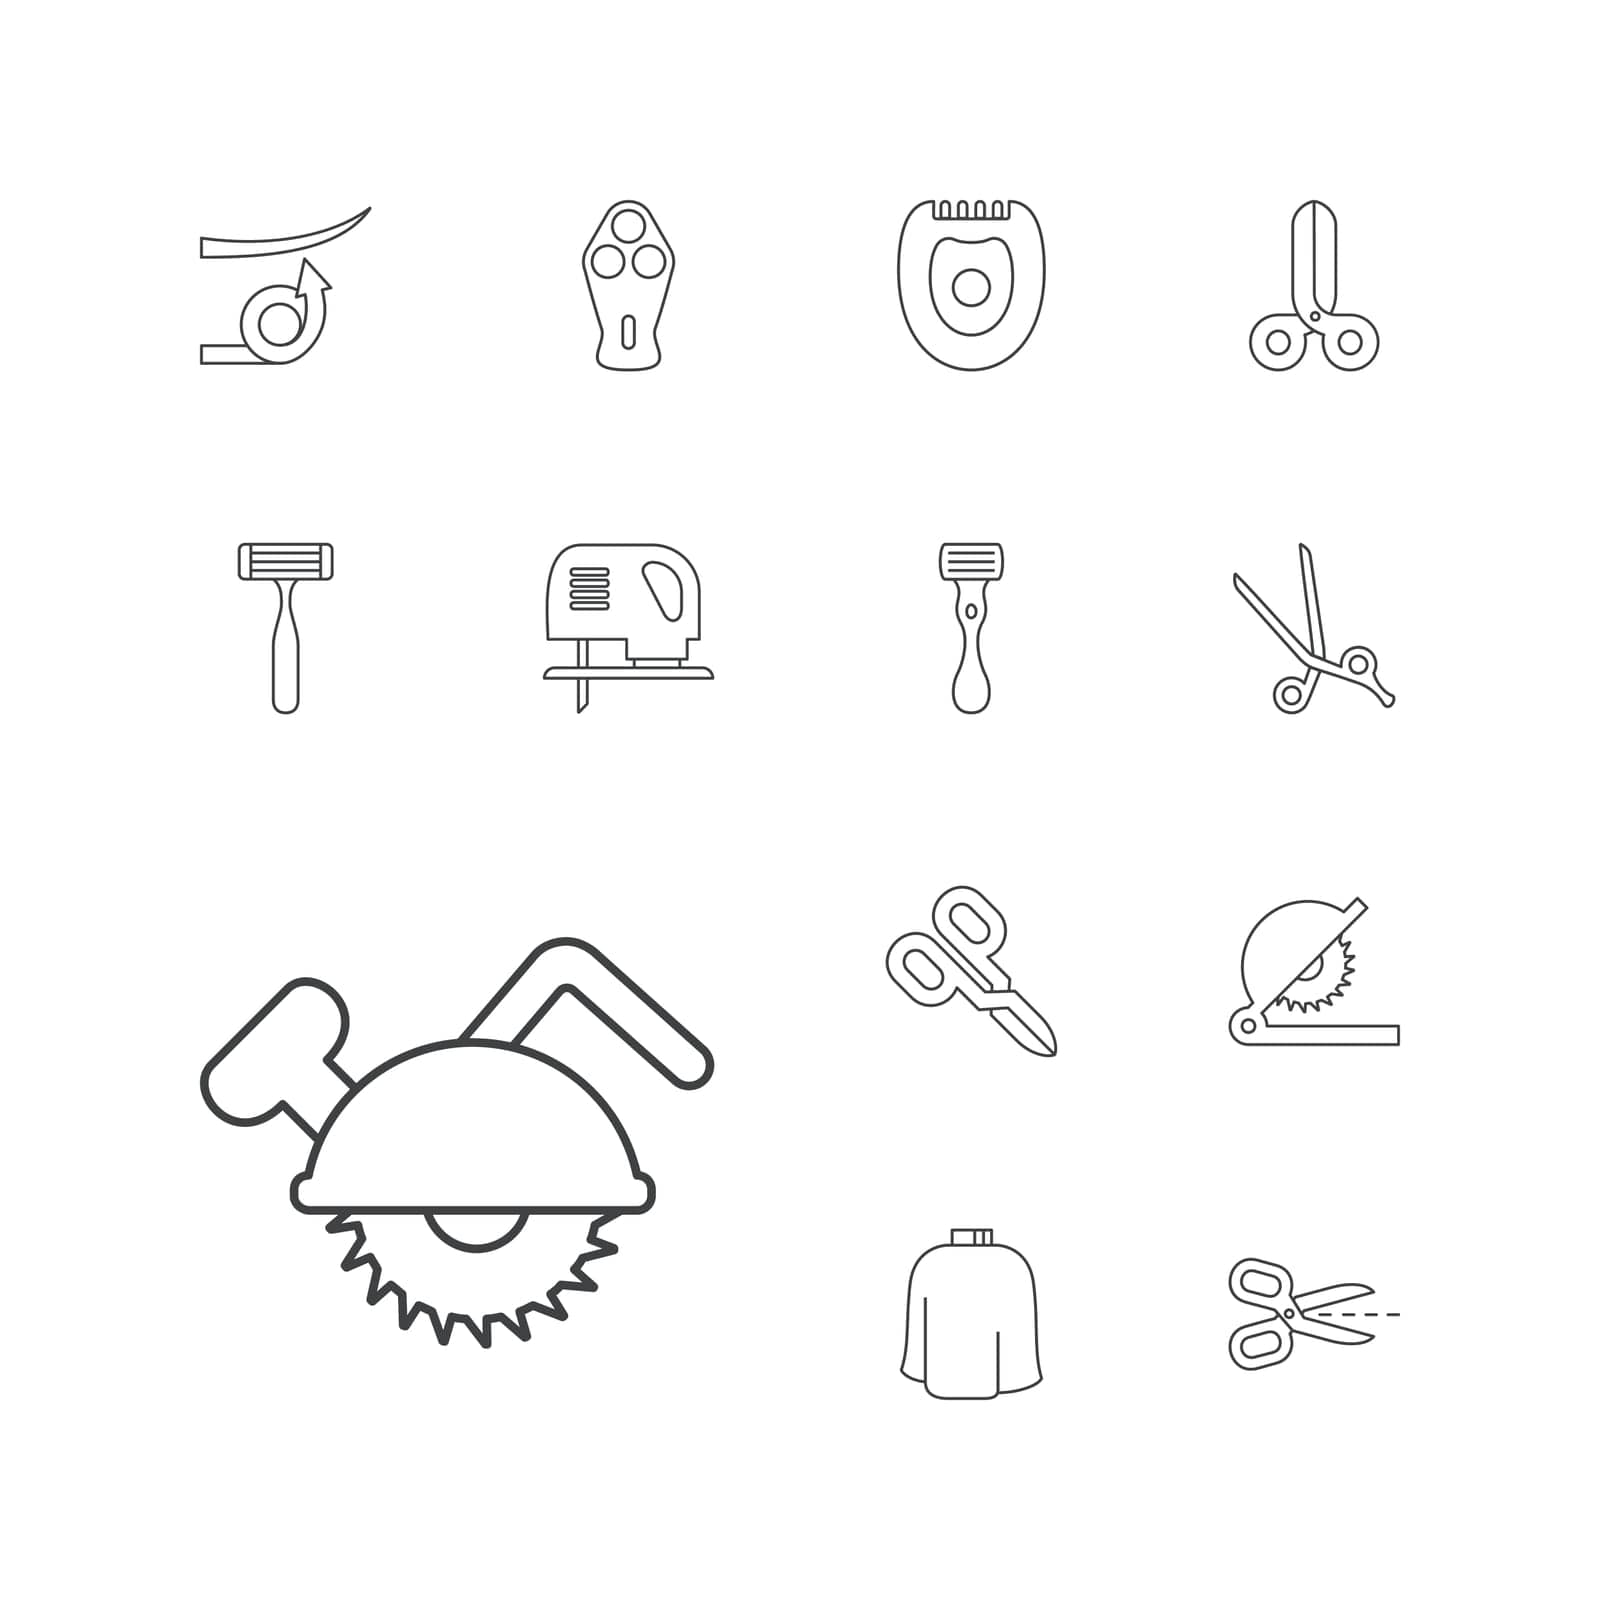 symbol,steel,cut,beauty,icon,sign,isolated,cutter,blade,hair,hairdresser,flat,design,peignoir,vector,barber,element,set,shape,electric,black,saw,circular,tool,sharp,scissors,straight,background,style,razor,illustration,manicure,object,care